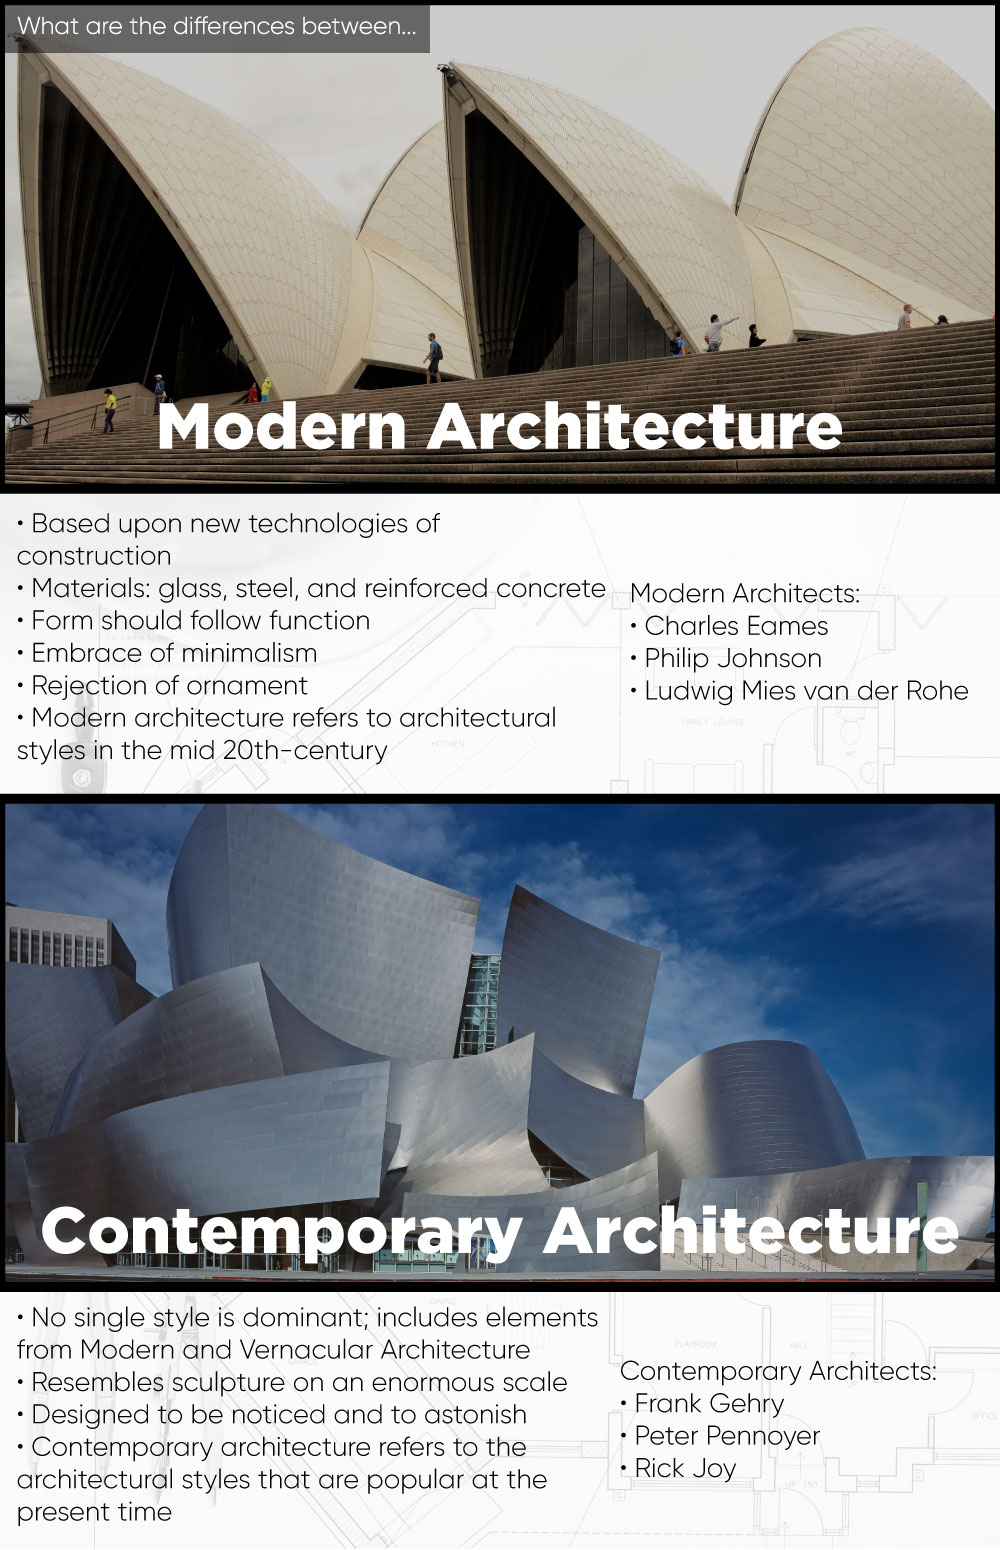 Contemporary Architecture: History and Common Features